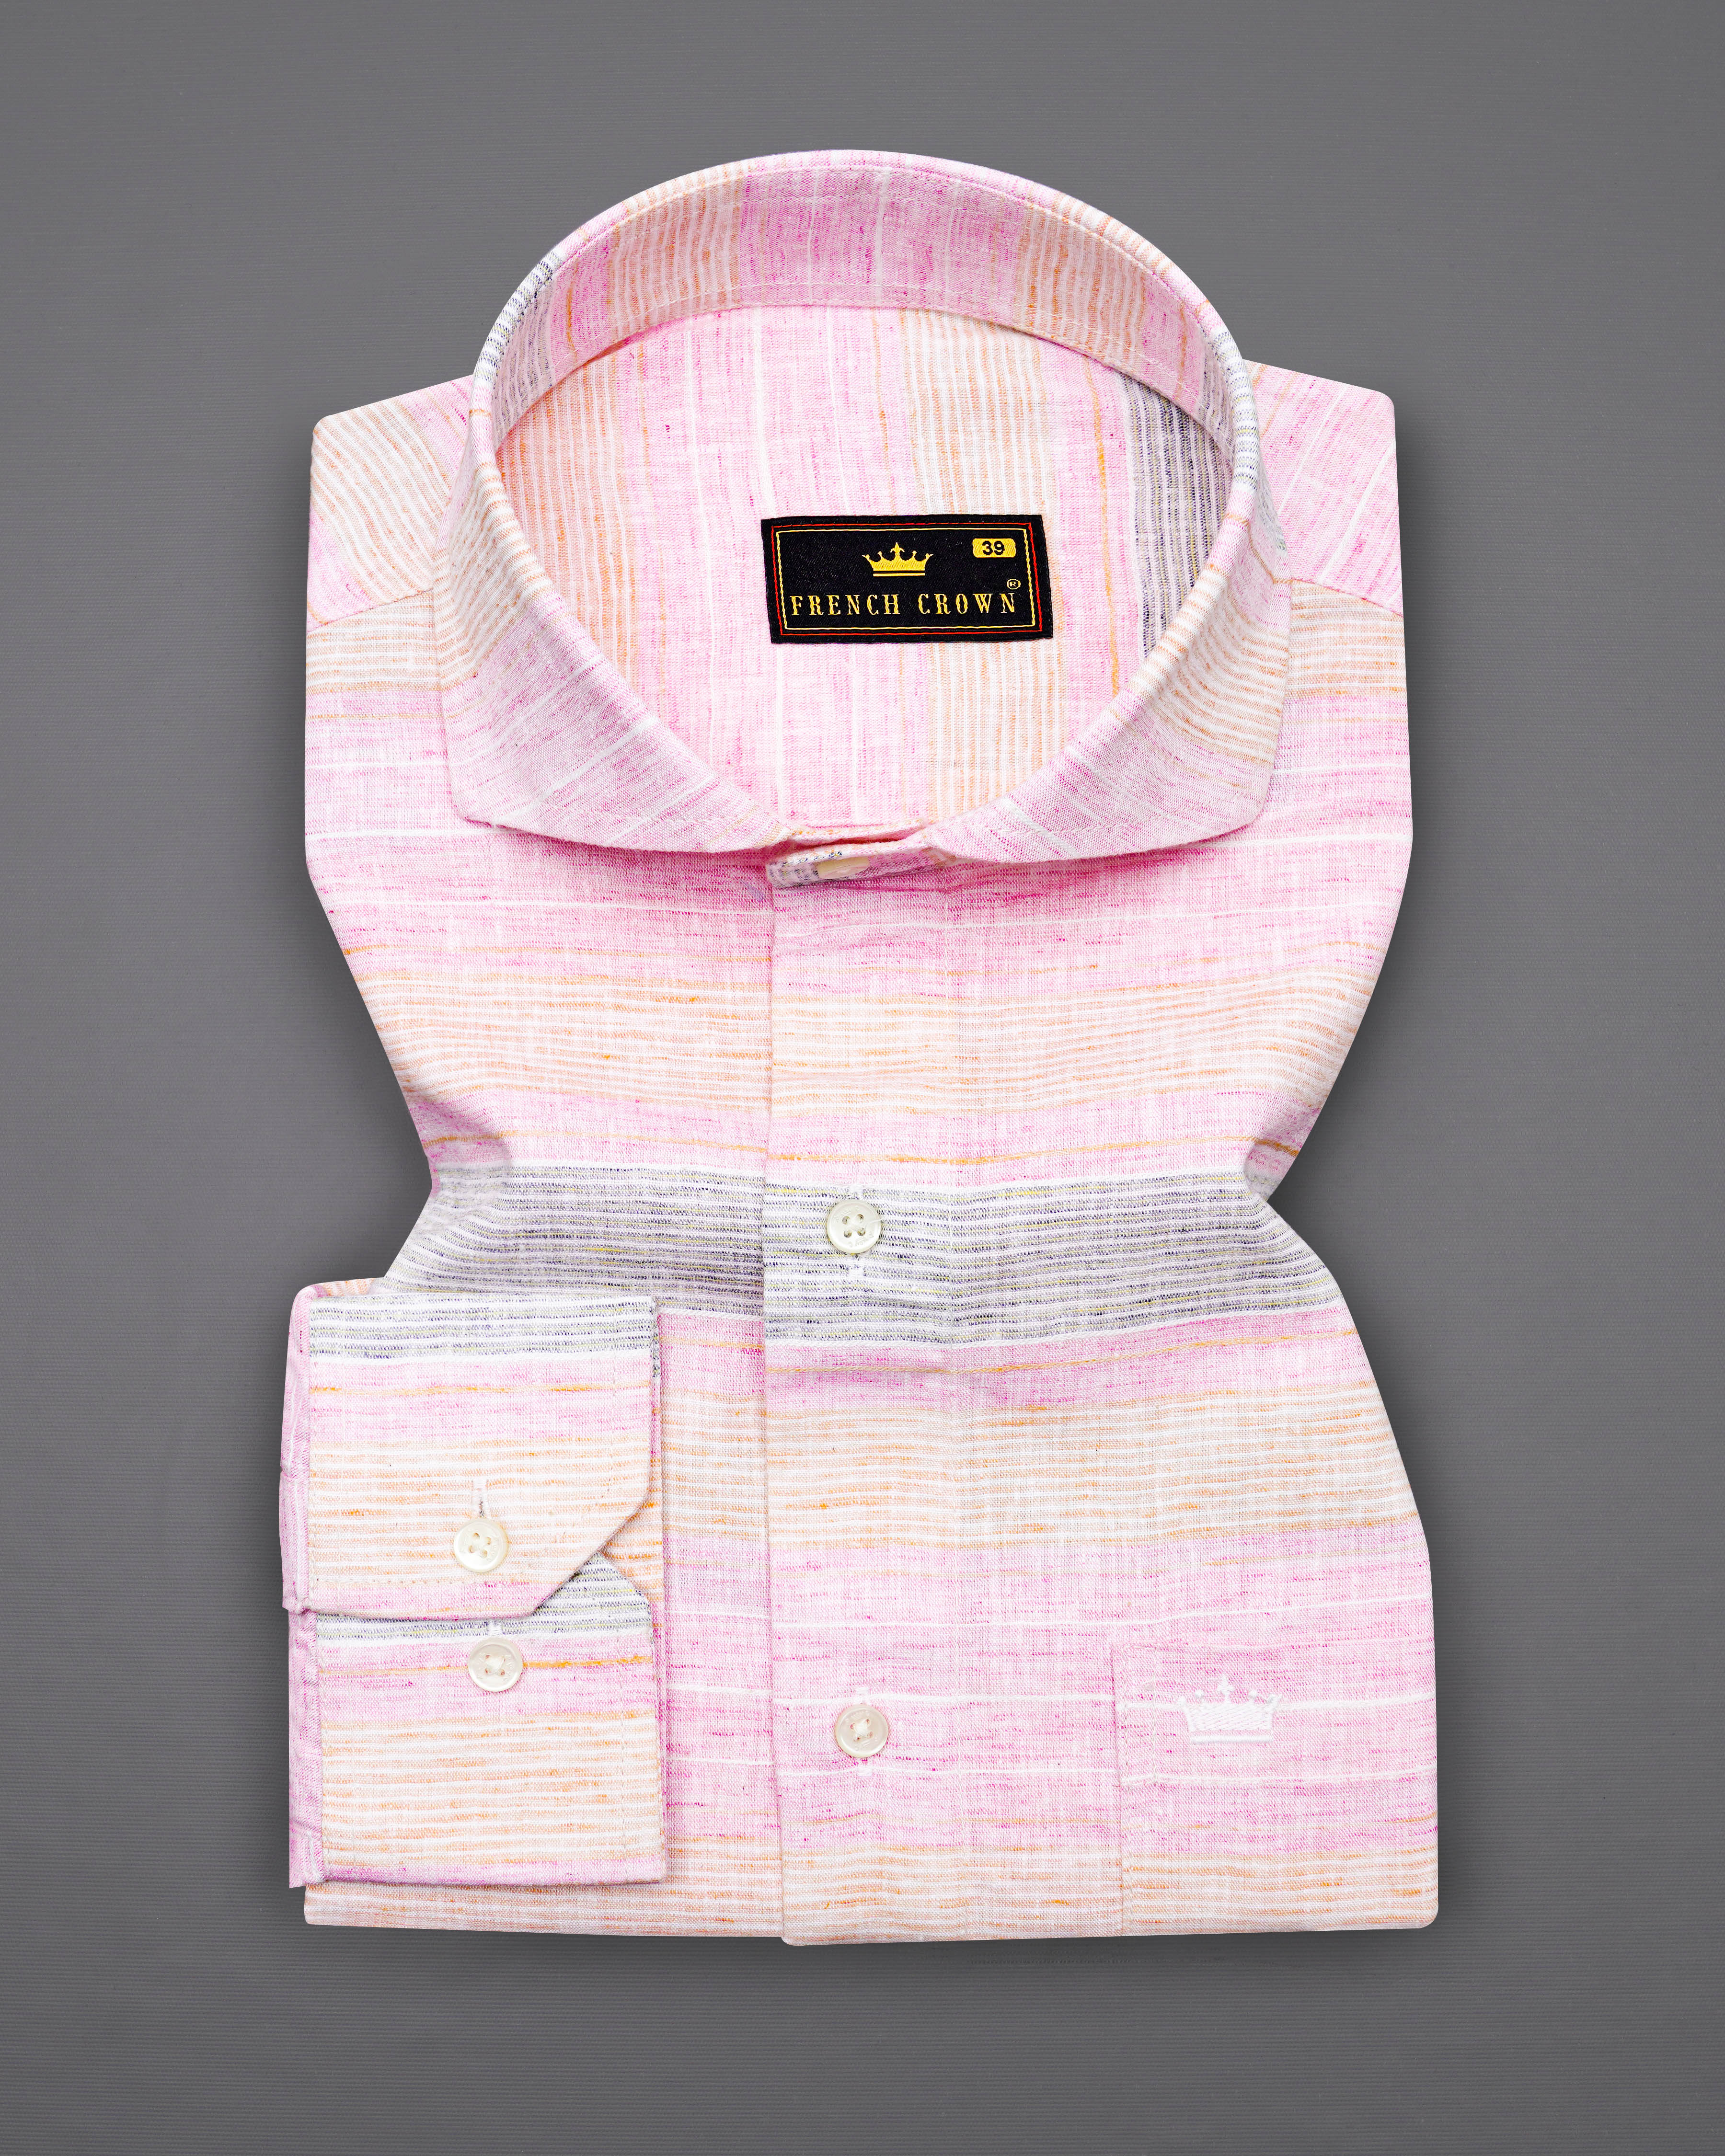 Pastel Pink Multicolour Striped Luxurious Linen Shirt  8555-CA-38,8555-CA-H-38,8555-CA-39,8555-CA-H-39,8555-CA-40,8555-CA-H-40,8555-CA-42,8555-CA-H-42,8555-CA-44,8555-CA-H-44,8555-CA-46,8555-CA-H-46,8555-CA-48,8555-CA-H-48,8555-CA-50,8555-CA-H-50,8555-CA-52,8555-CA-H-52